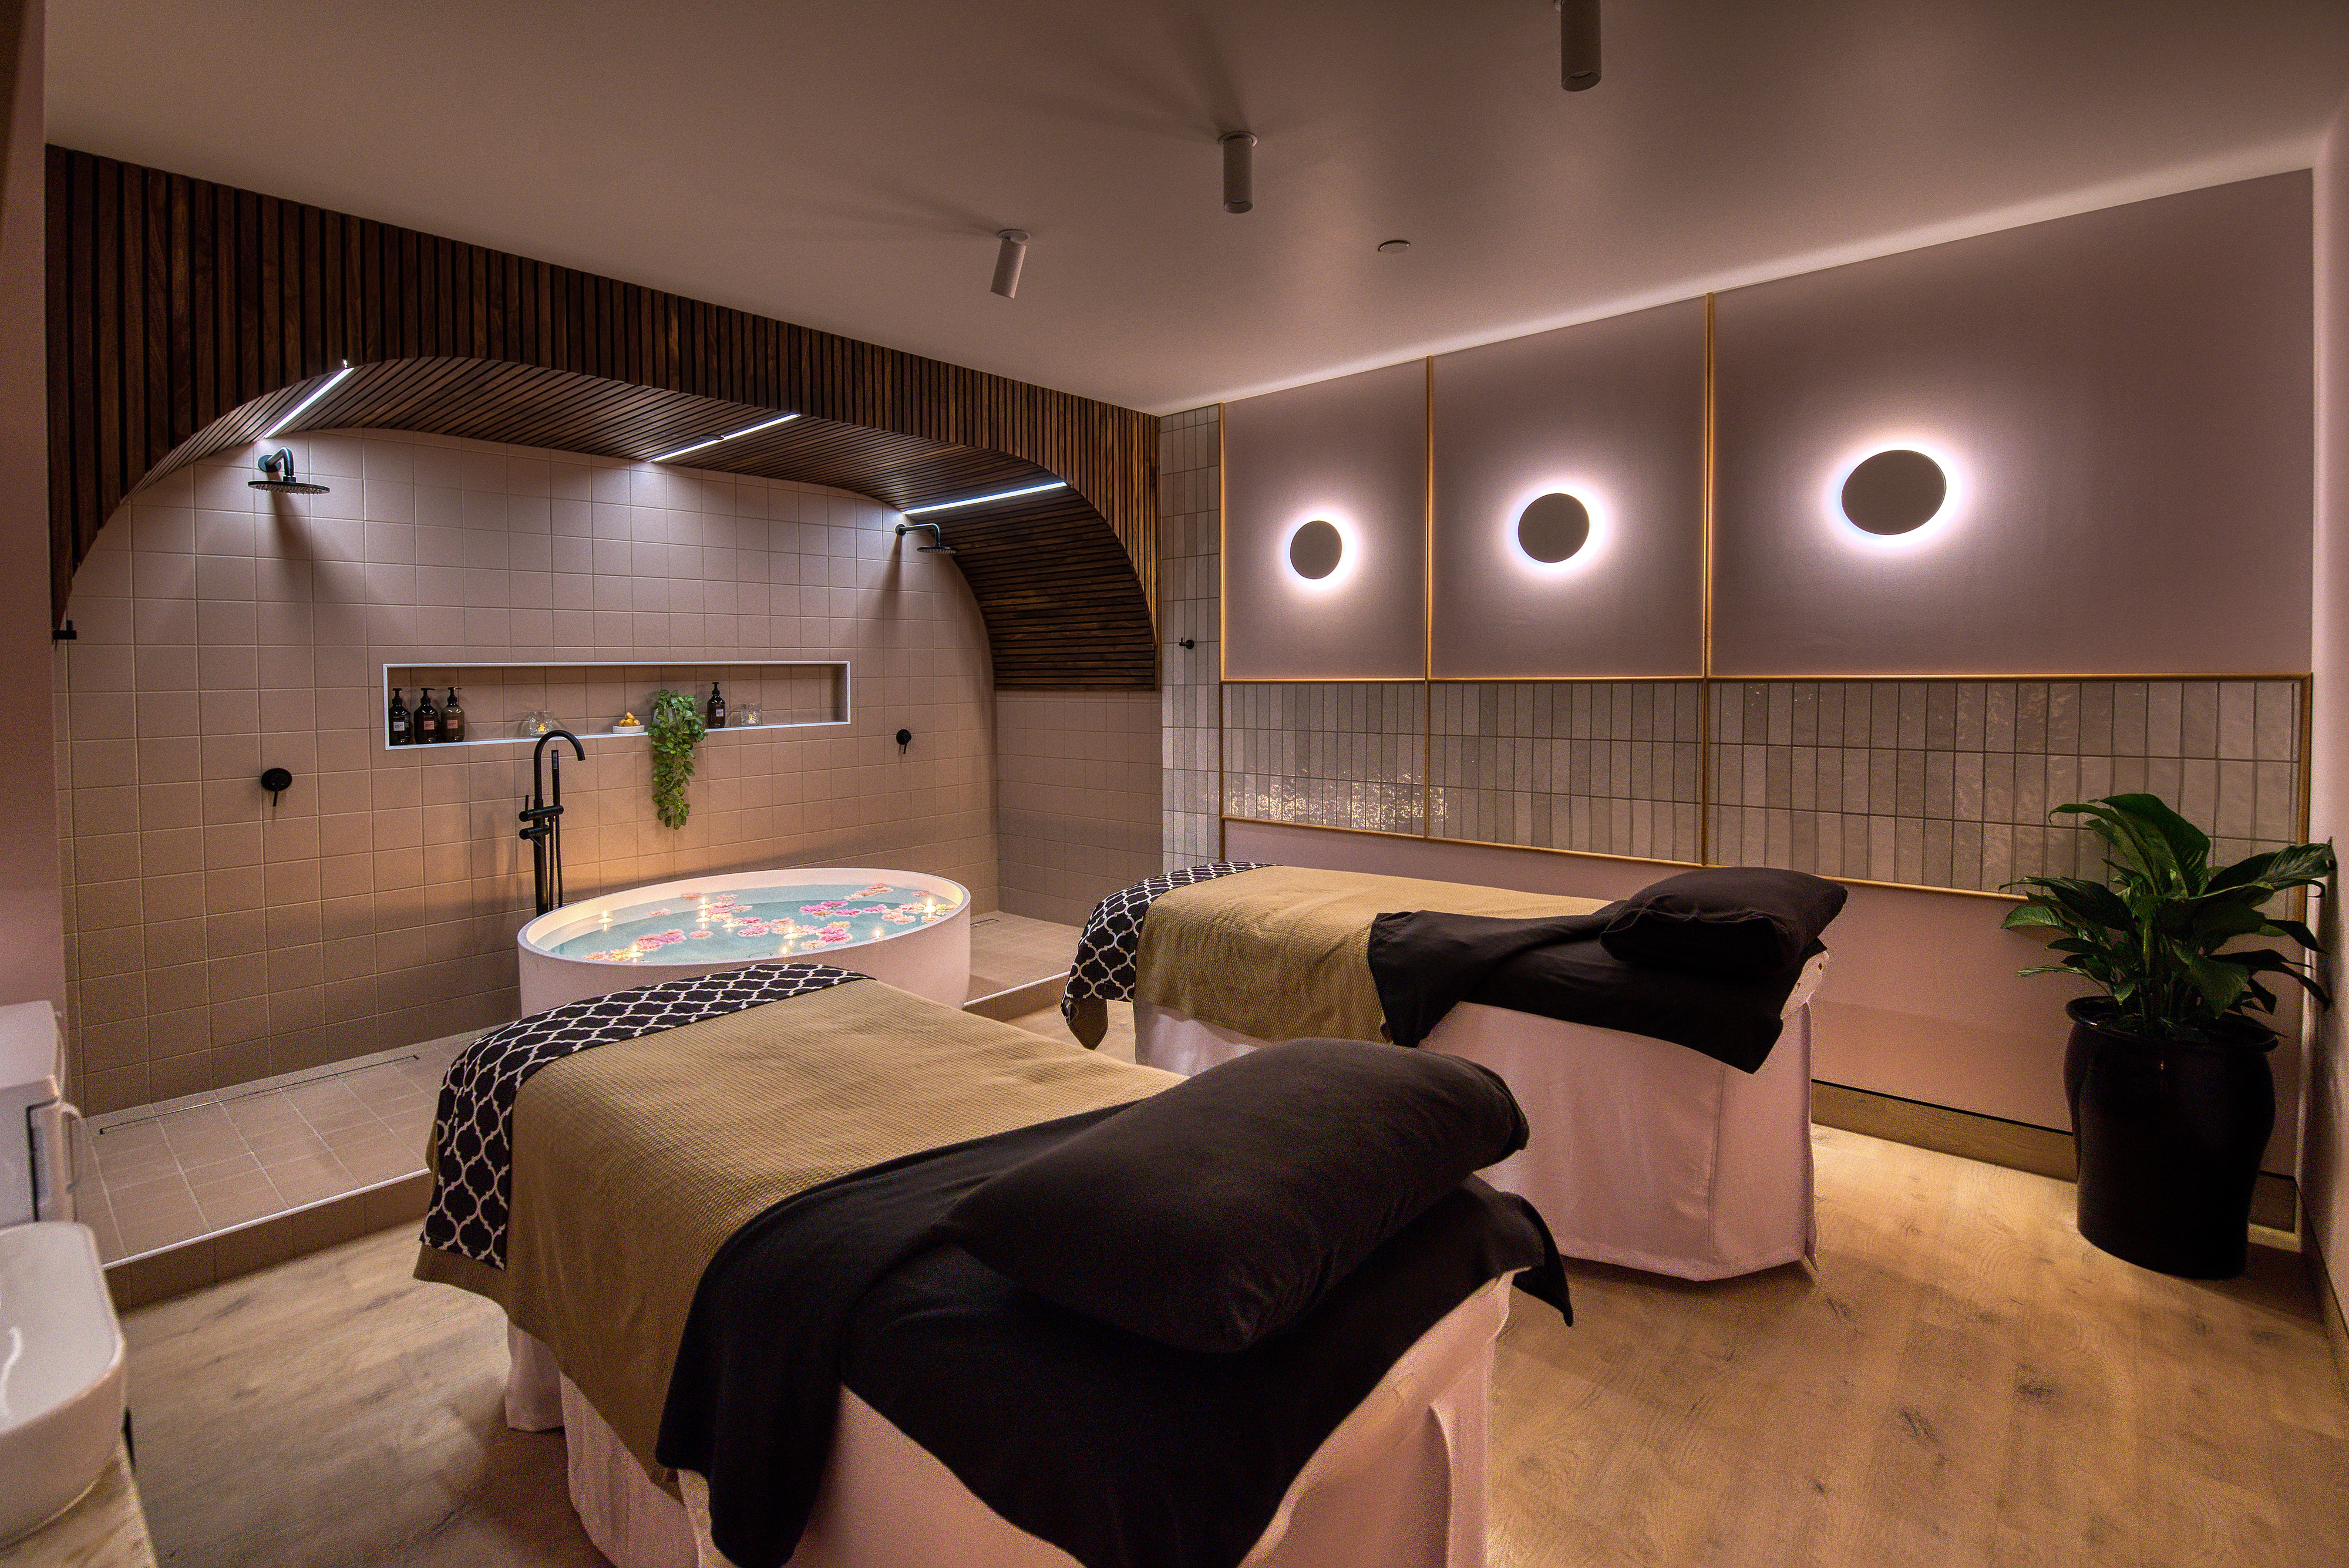 Double treatment spa room with two beds and spa bath in between. Subtle lighting and pink furnishings.